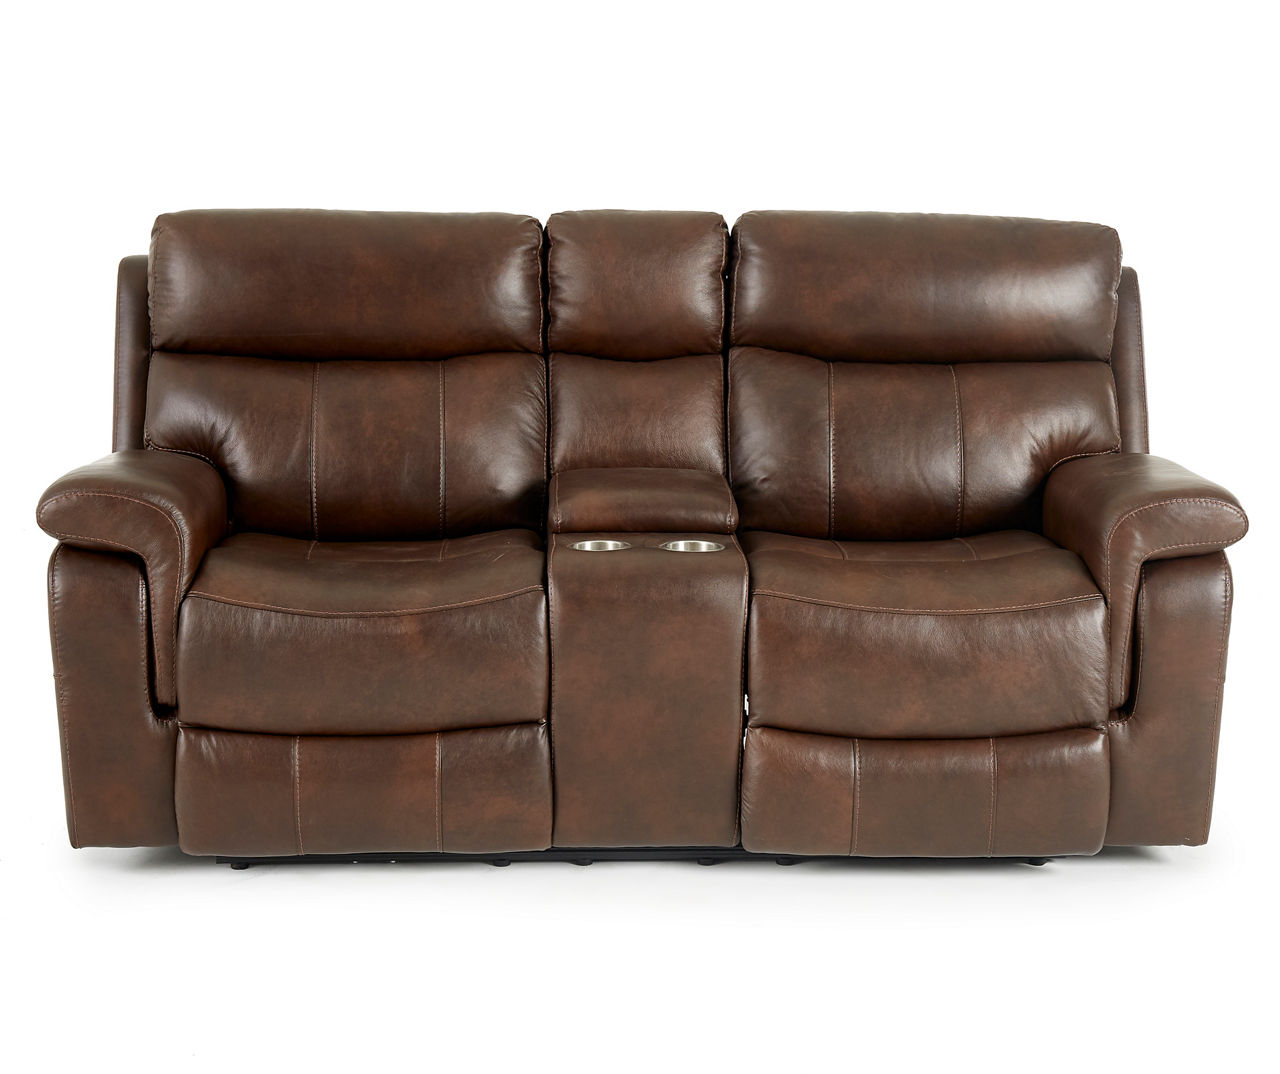 Broyhill Wellsley Leather Power Reclining Console Loveseat